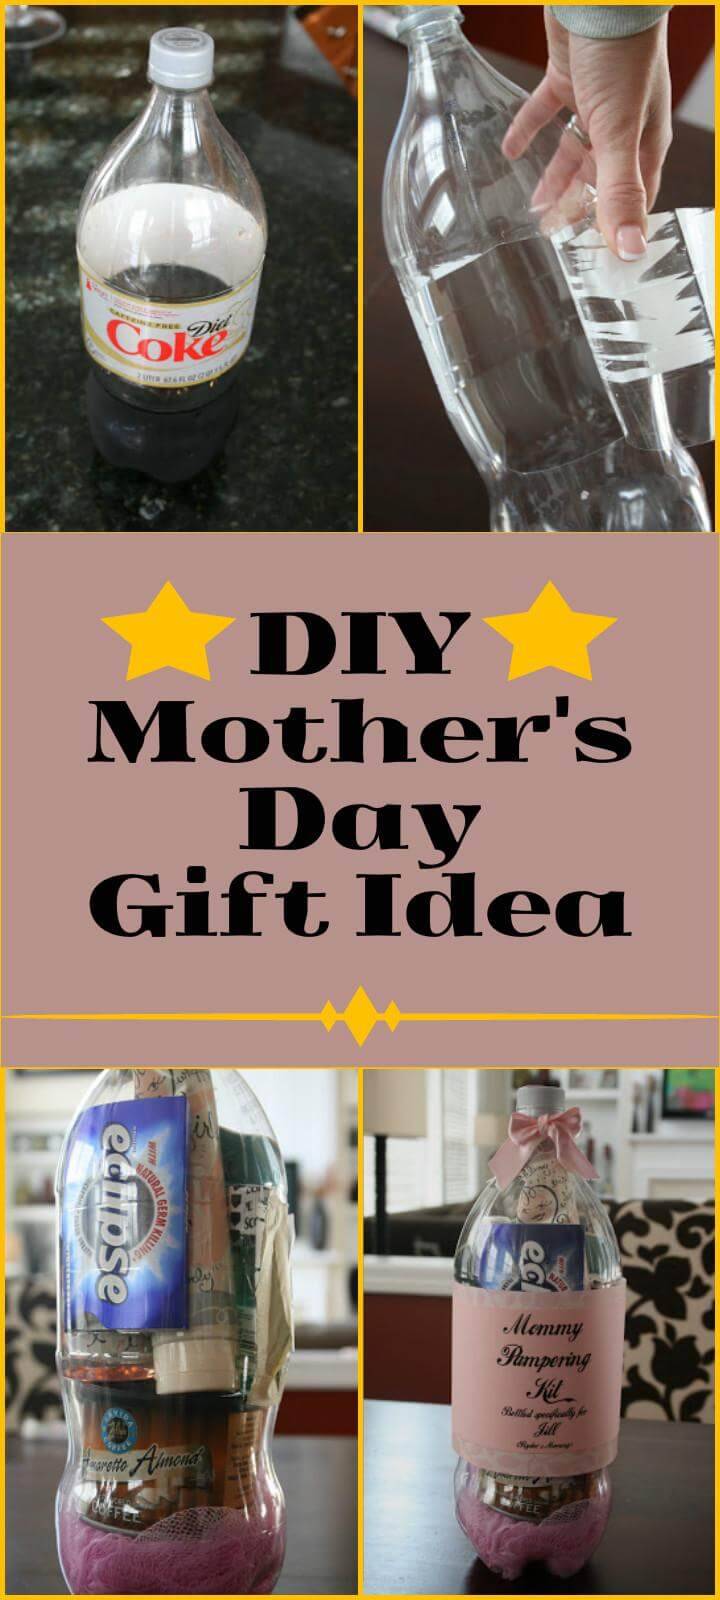 DIY Mother's Day gift idea